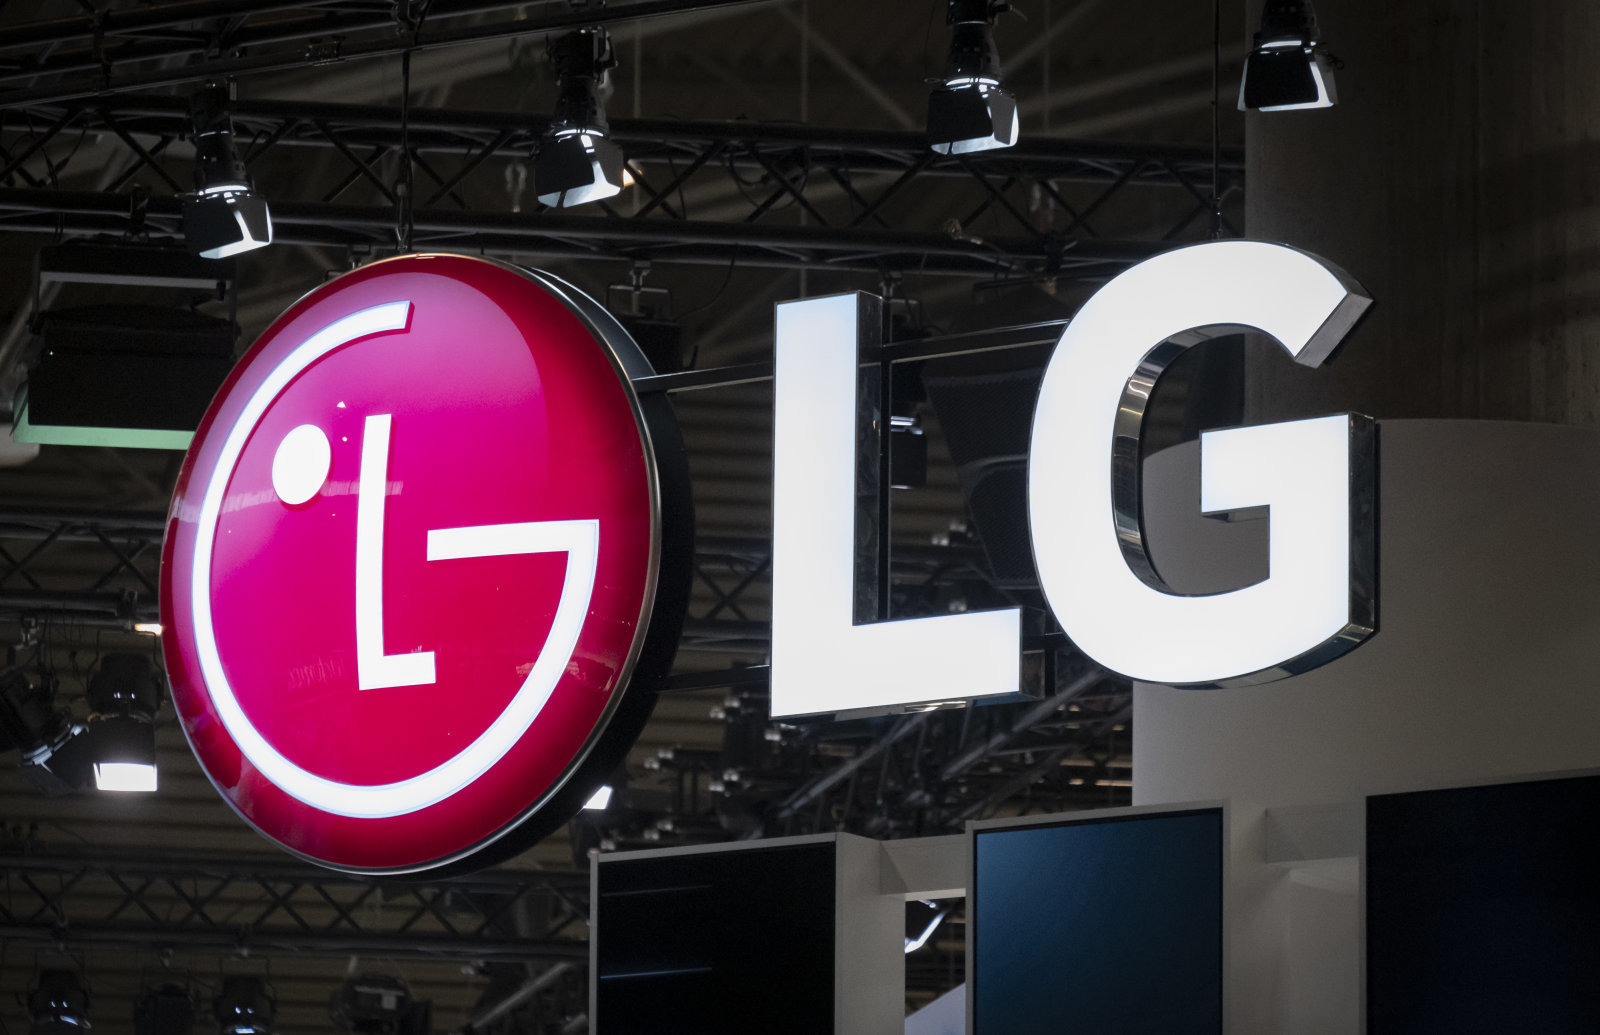 The LG logo is seen during MWC 2019.
The MWC2019 Mobile World Congress opens its doors to showcase the latest news of the manufacturers of smart phones. The presence of devices prepared to manage 5G communications has been the hallmark of this edition. (Photo by Paco Freire / SOPA Images/Sipa USA)